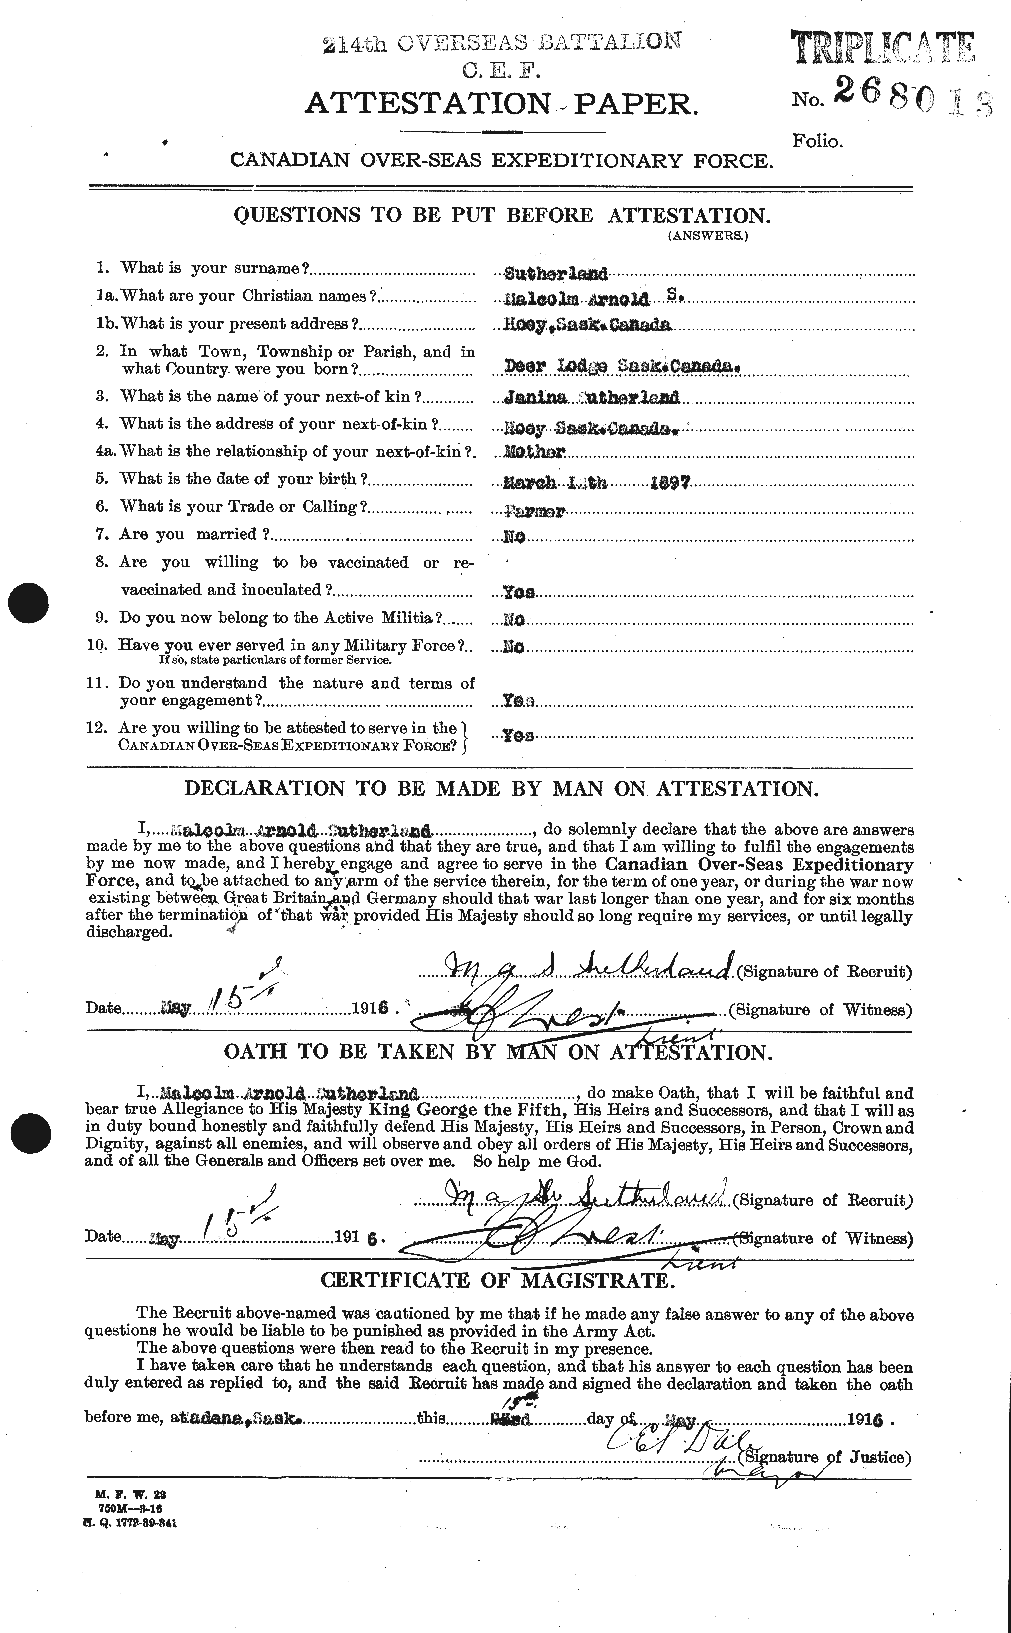 Personnel Records of the First World War - CEF 126844a